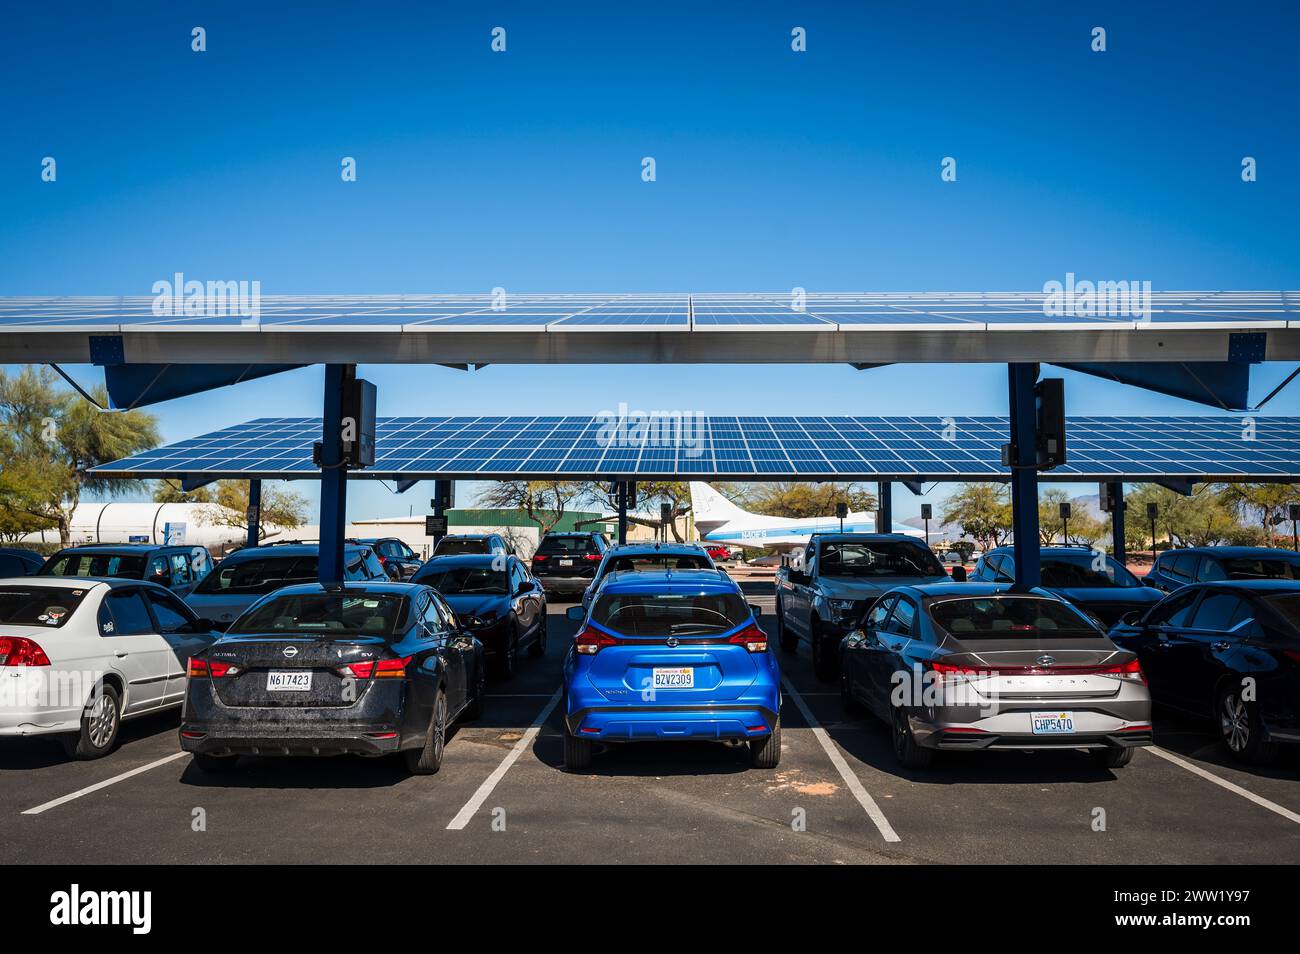 Pima Air and Space Museum.  Solar panel parking lot shelters. Tucson Arizona. Stock Photo